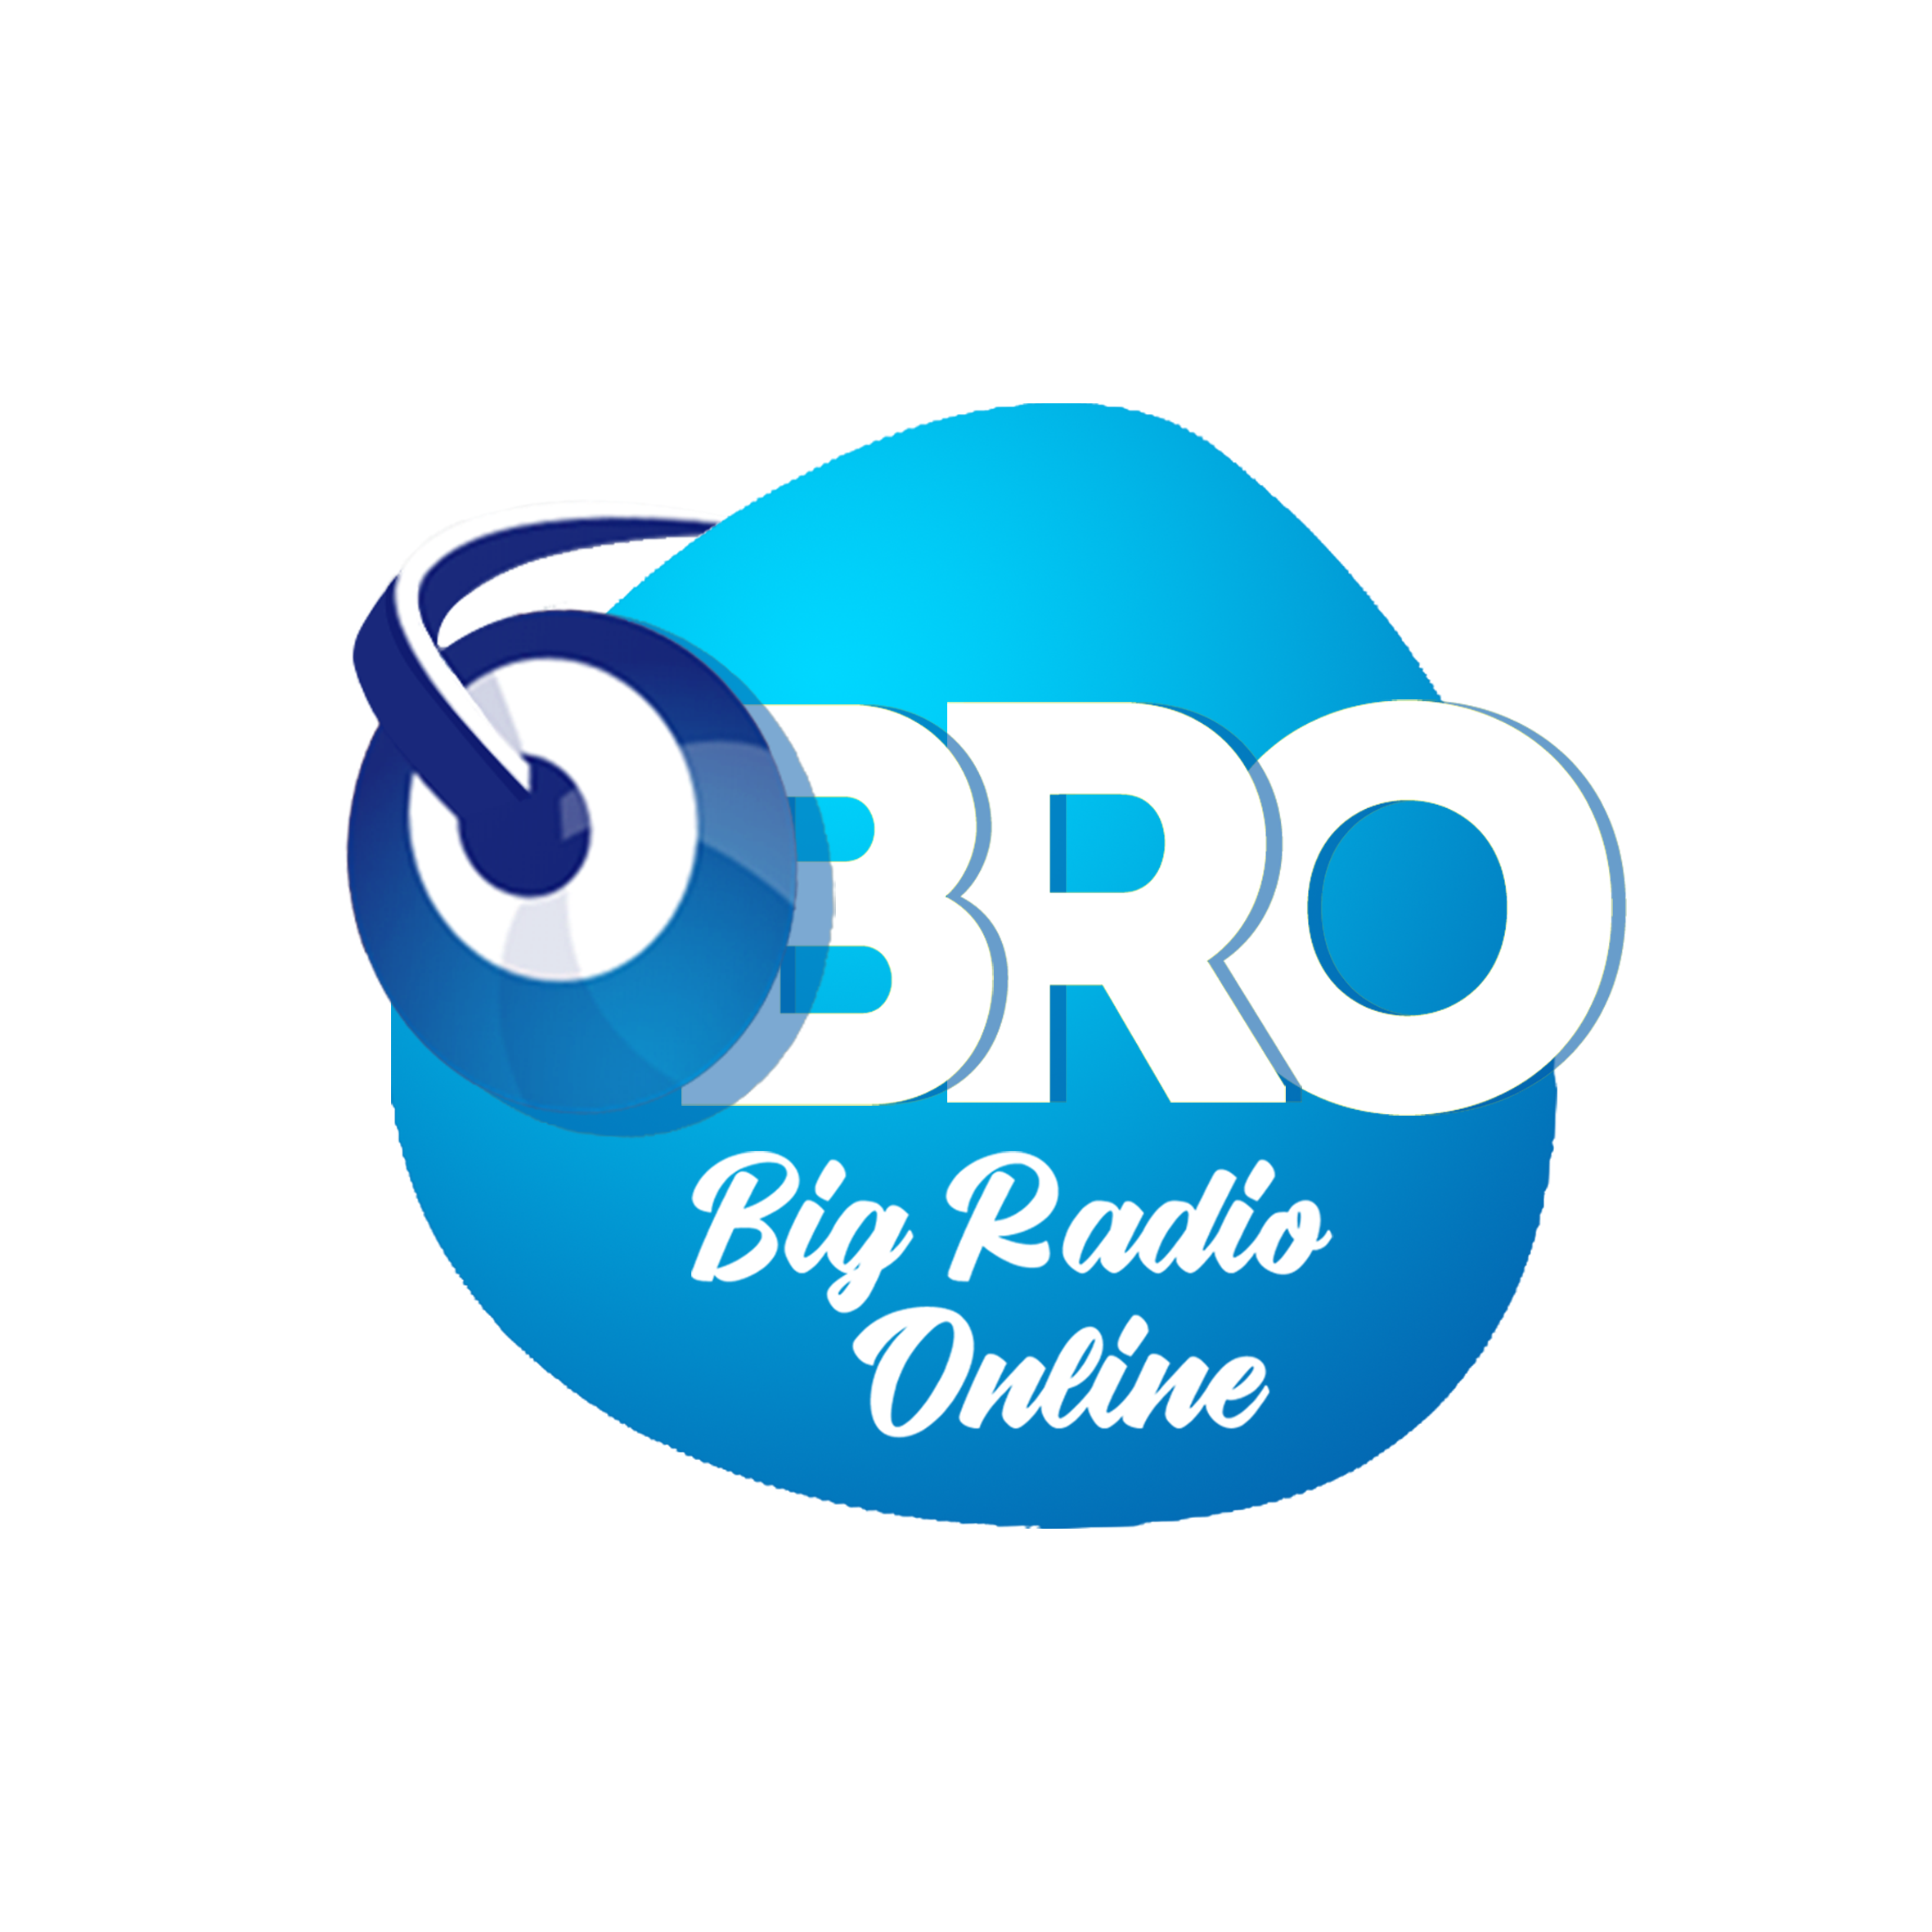 Get ready to groove to BRO – BIG RADIO ONLINE’s fun and quirky song that celebrates friendship!